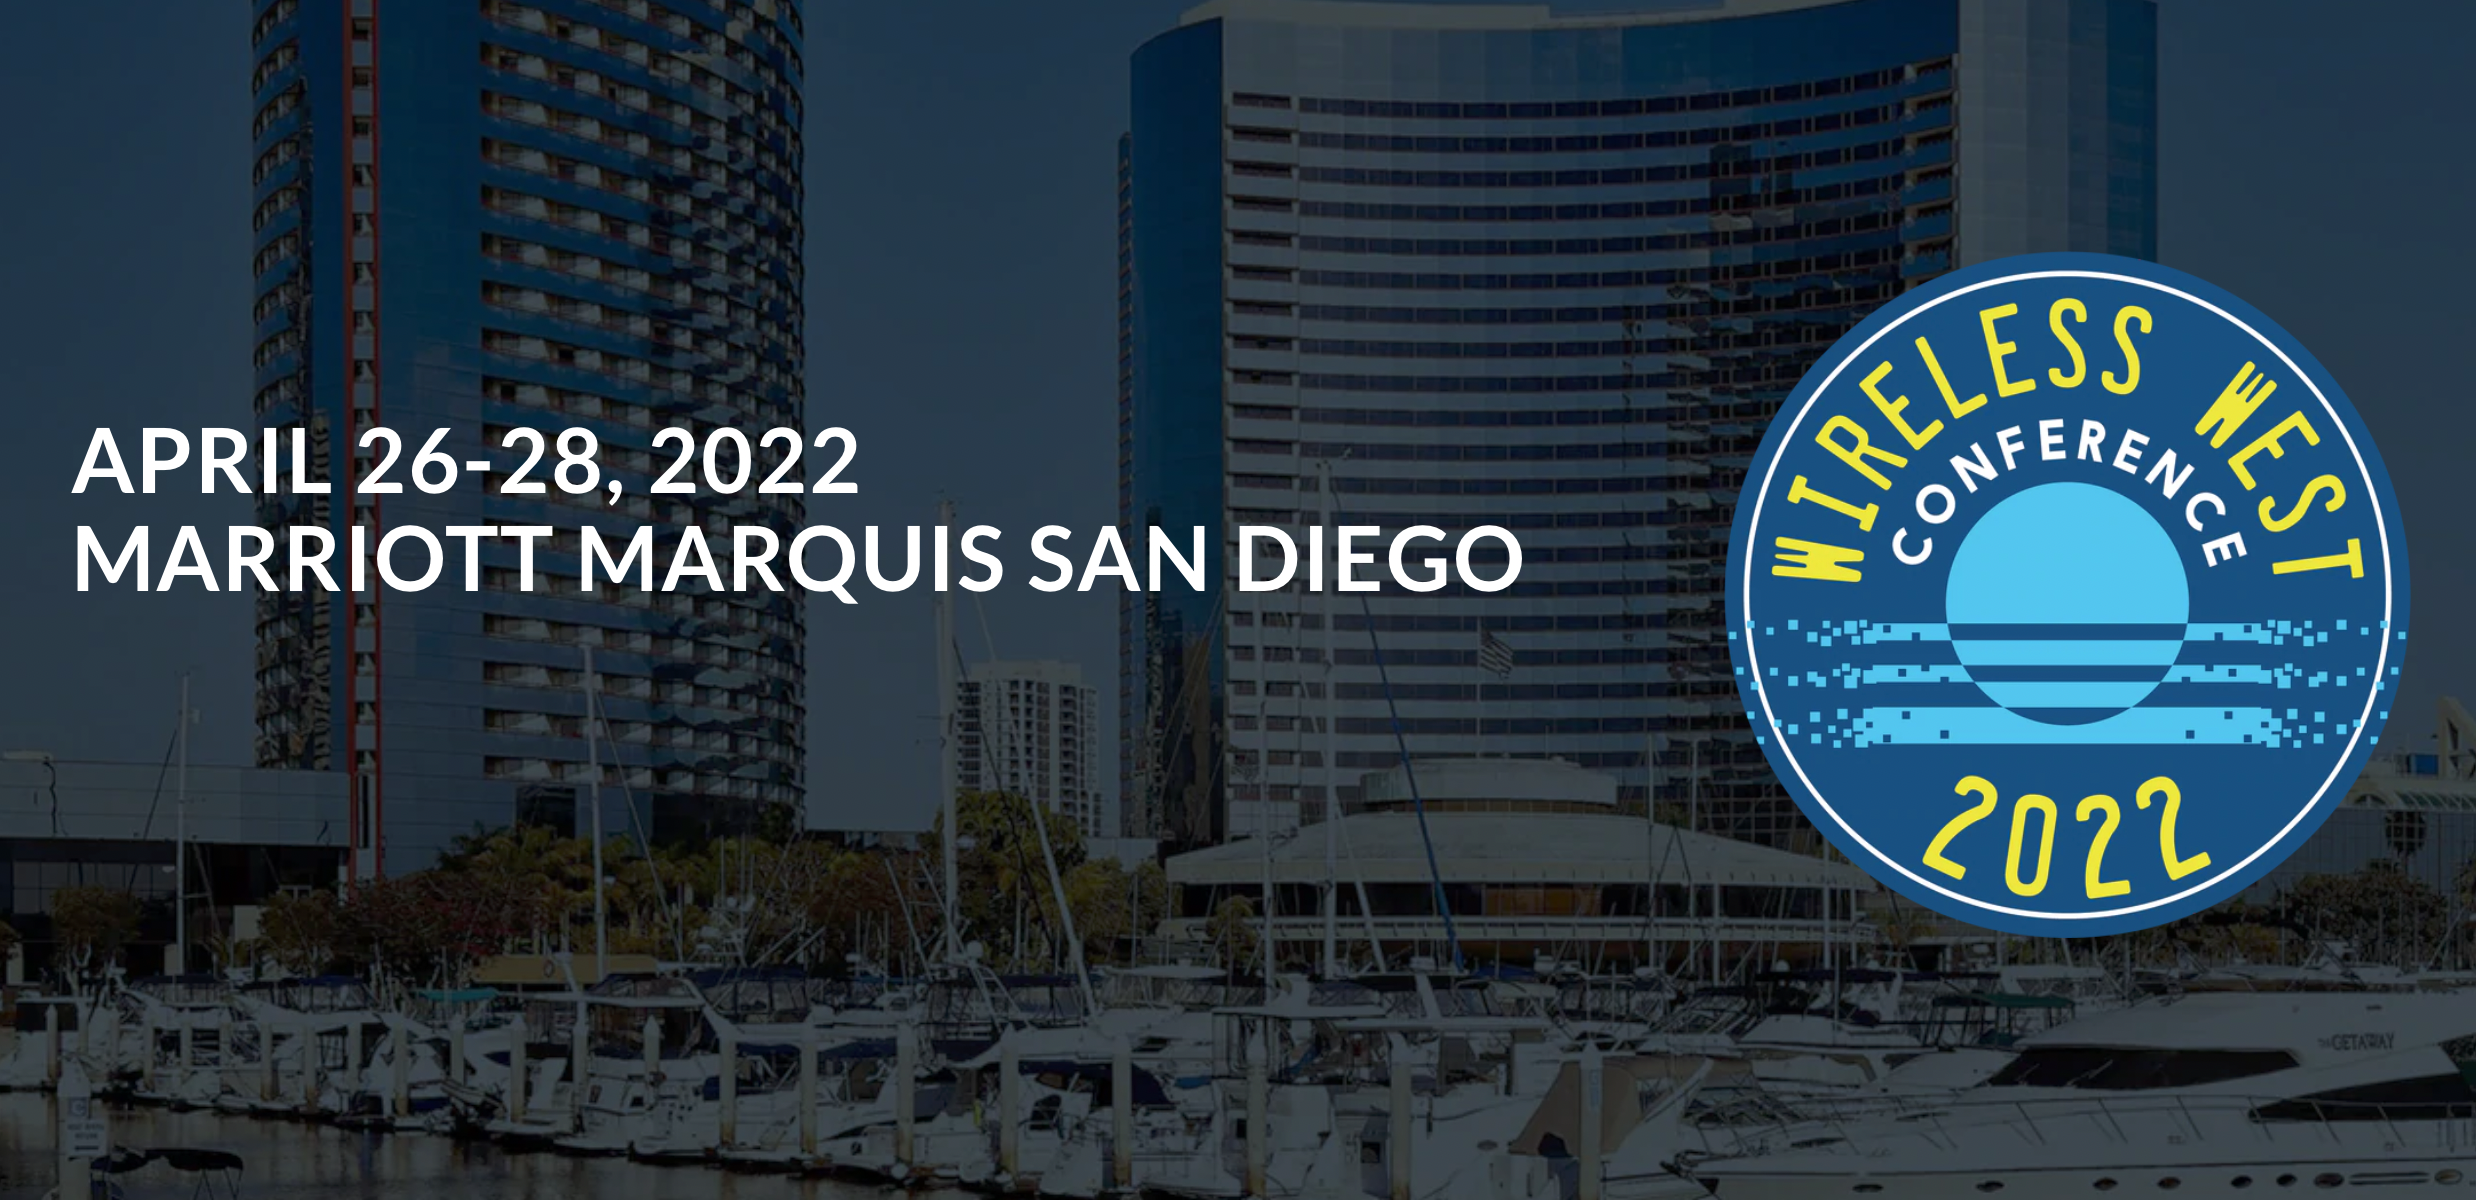 Featured image for “Wireless West Conference 2022 – San Diego”